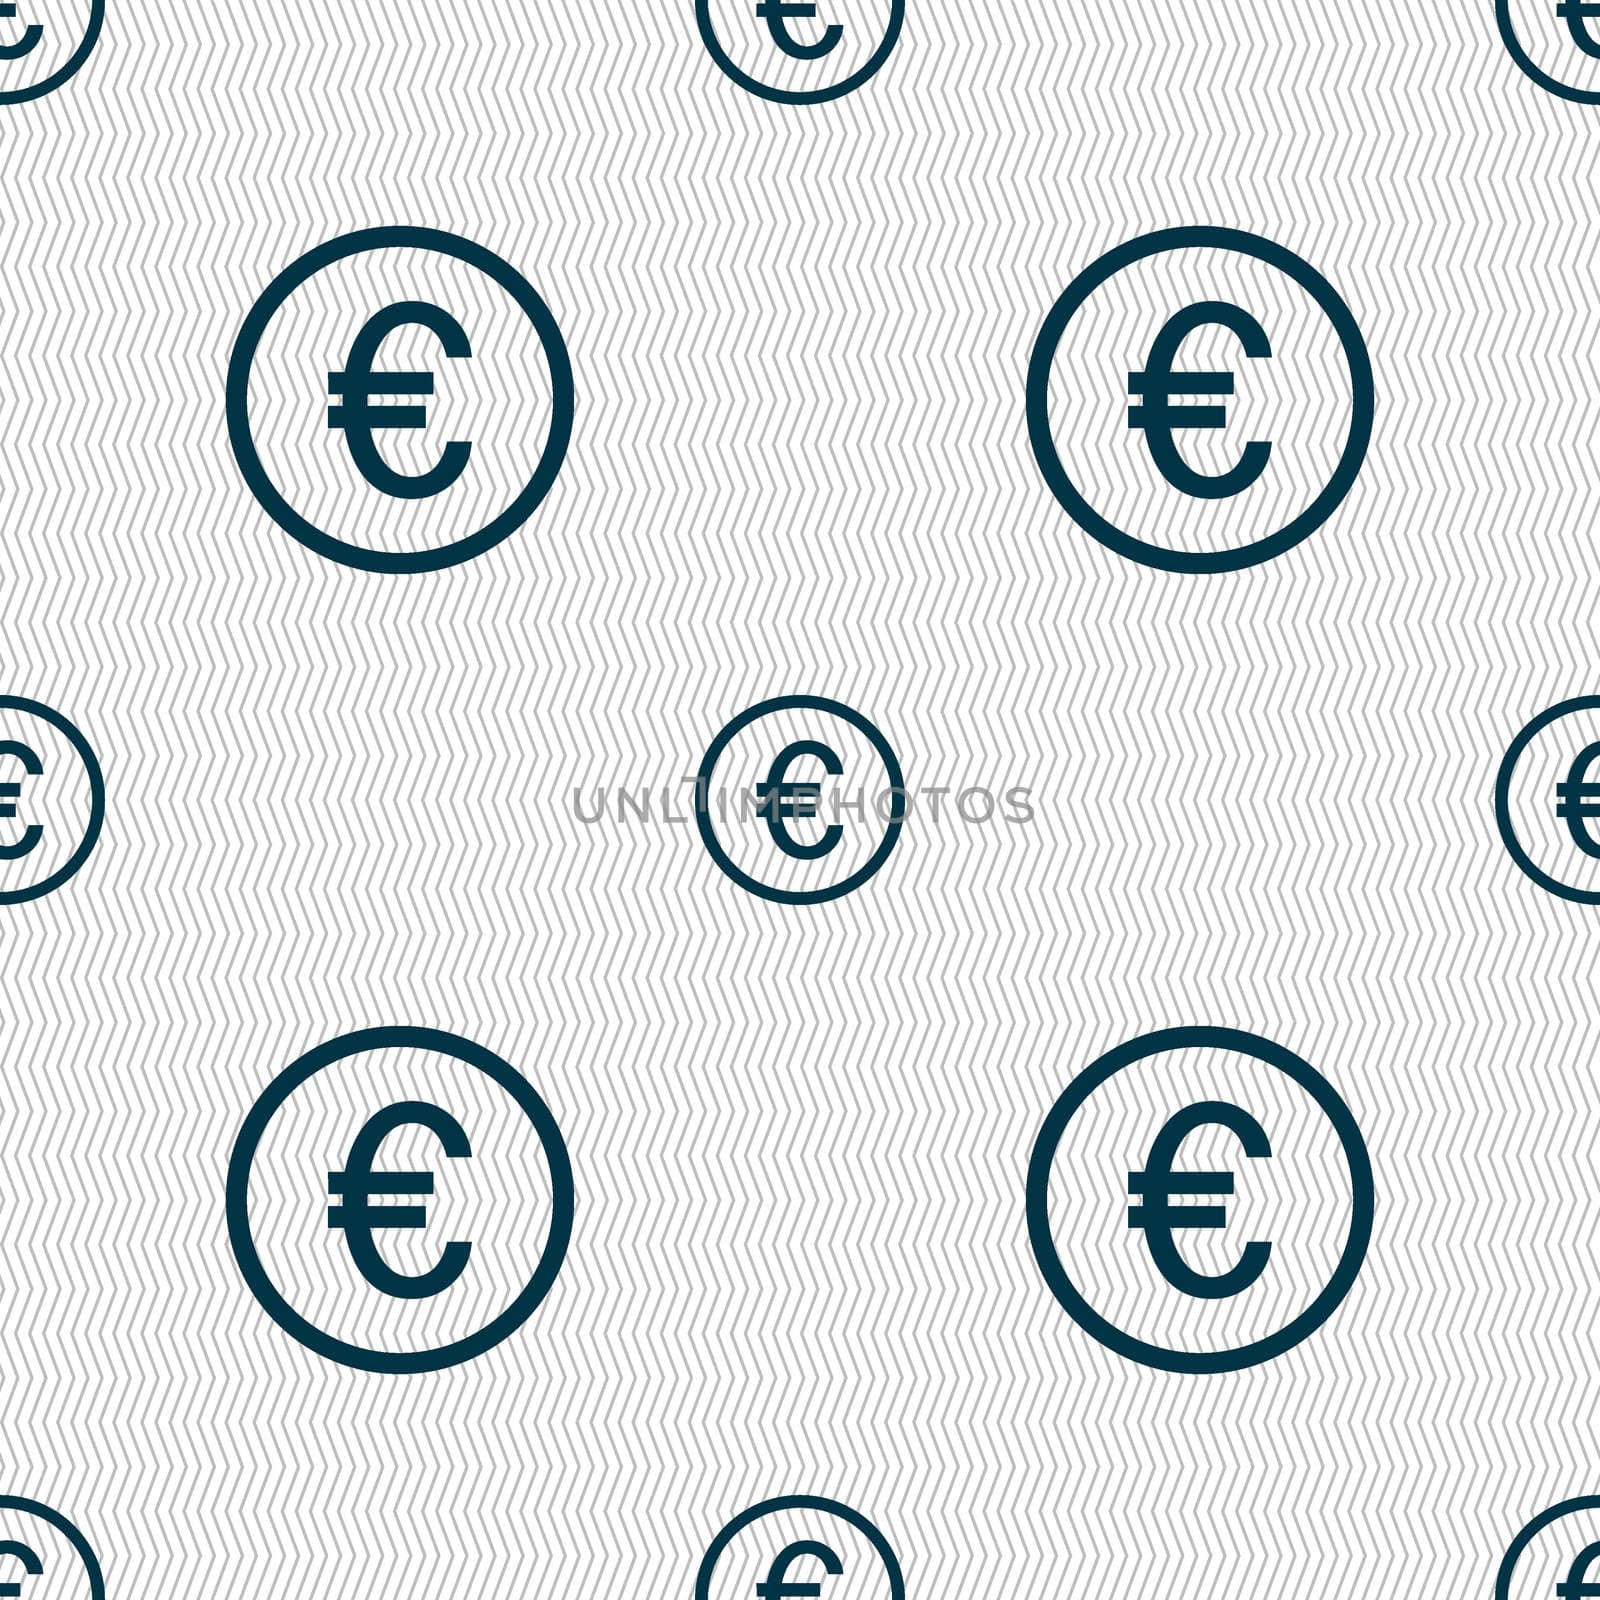 Euro icon sign. Seamless abstract background with geometric shapes. illustration